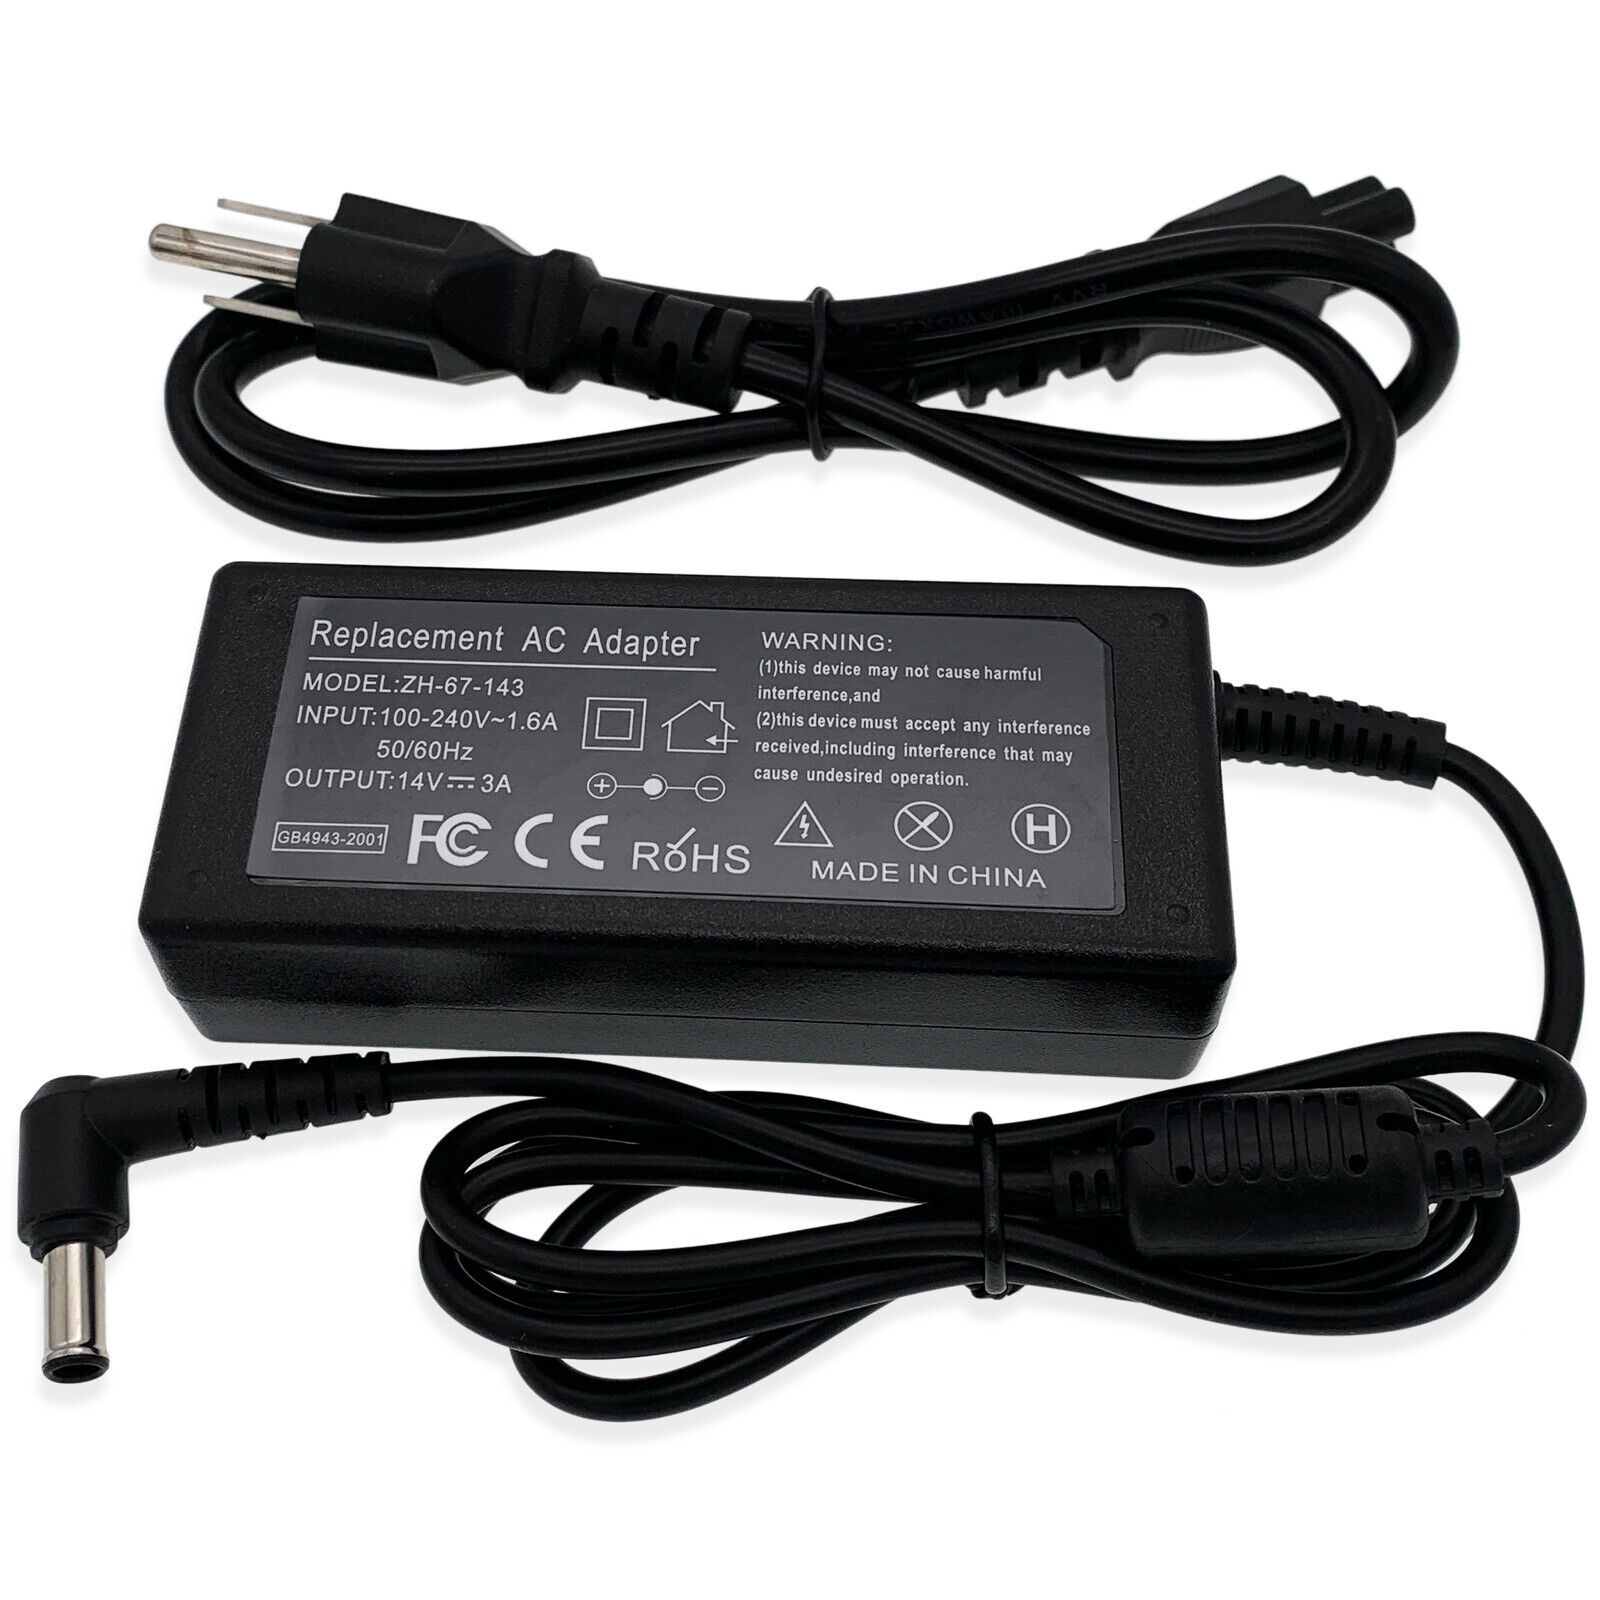 NEW AC Power Adapter for Samsung SyncMaster LCD/TFT 180T 172T 191T 192T